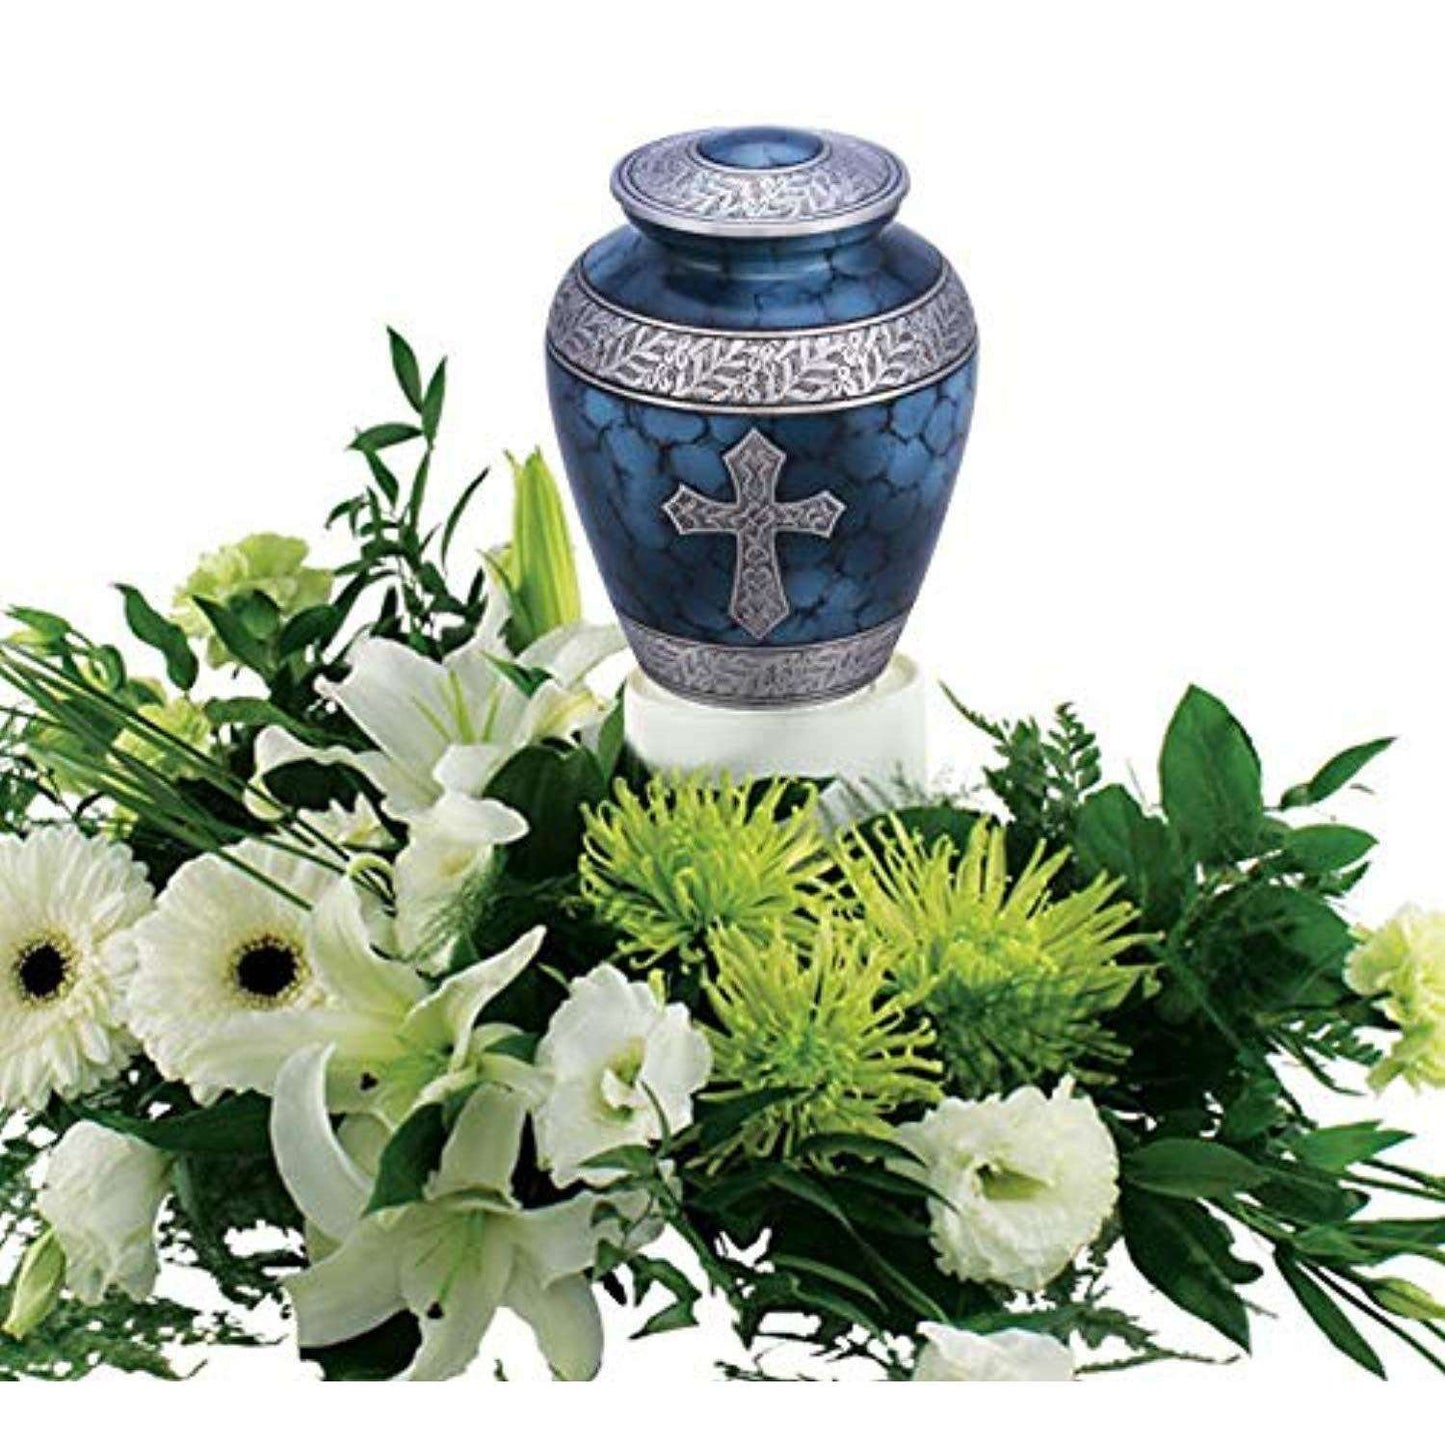 Christian Design Cremation Urns In God's Service Store